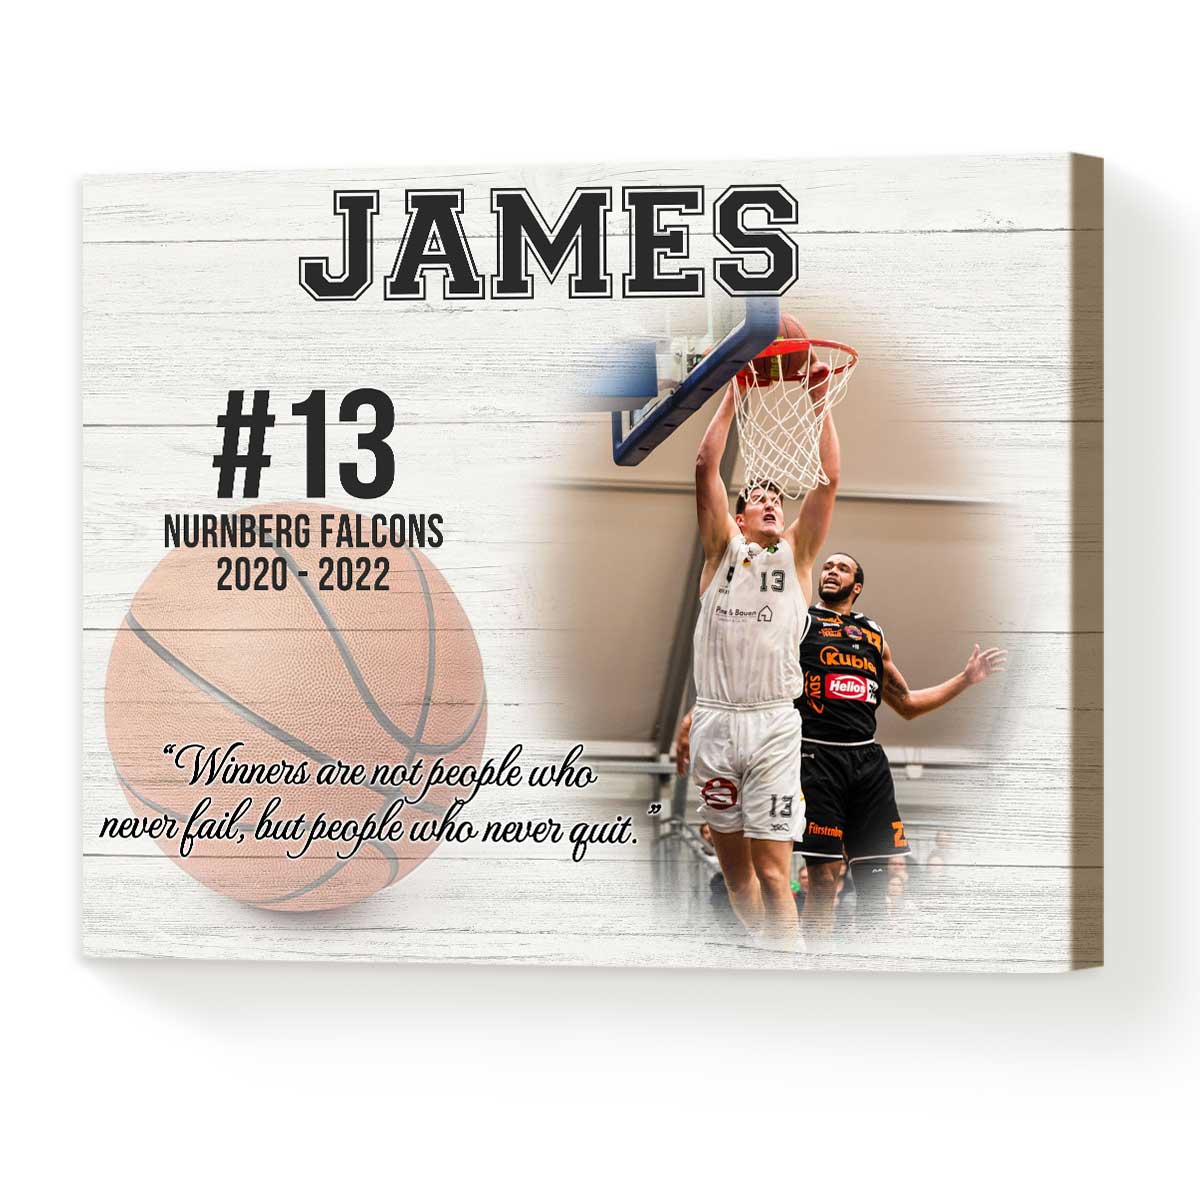 https://benicee.com/wp-content/uploads/2022/10/Personalized-Gift-For-Basketball-Player-Gift-Basketball-Senior-Gift-Frame-Basketball-Player-Appreciation-Gift.jpg